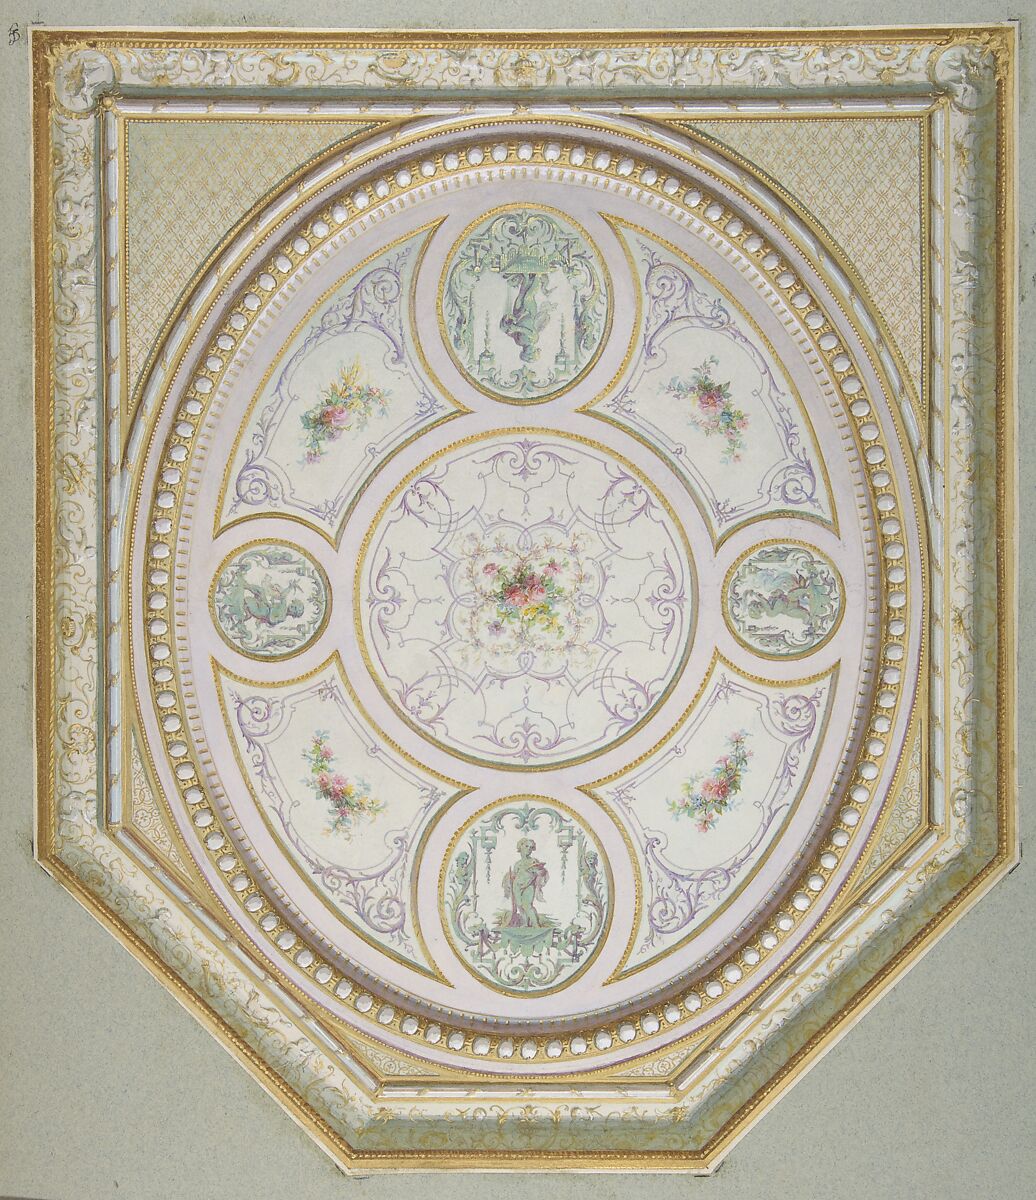 Ceiling Design, Jules-Edmond-Charles Lachaise (French, died 1897), Graphite, watercolor, gouache, and gilt 